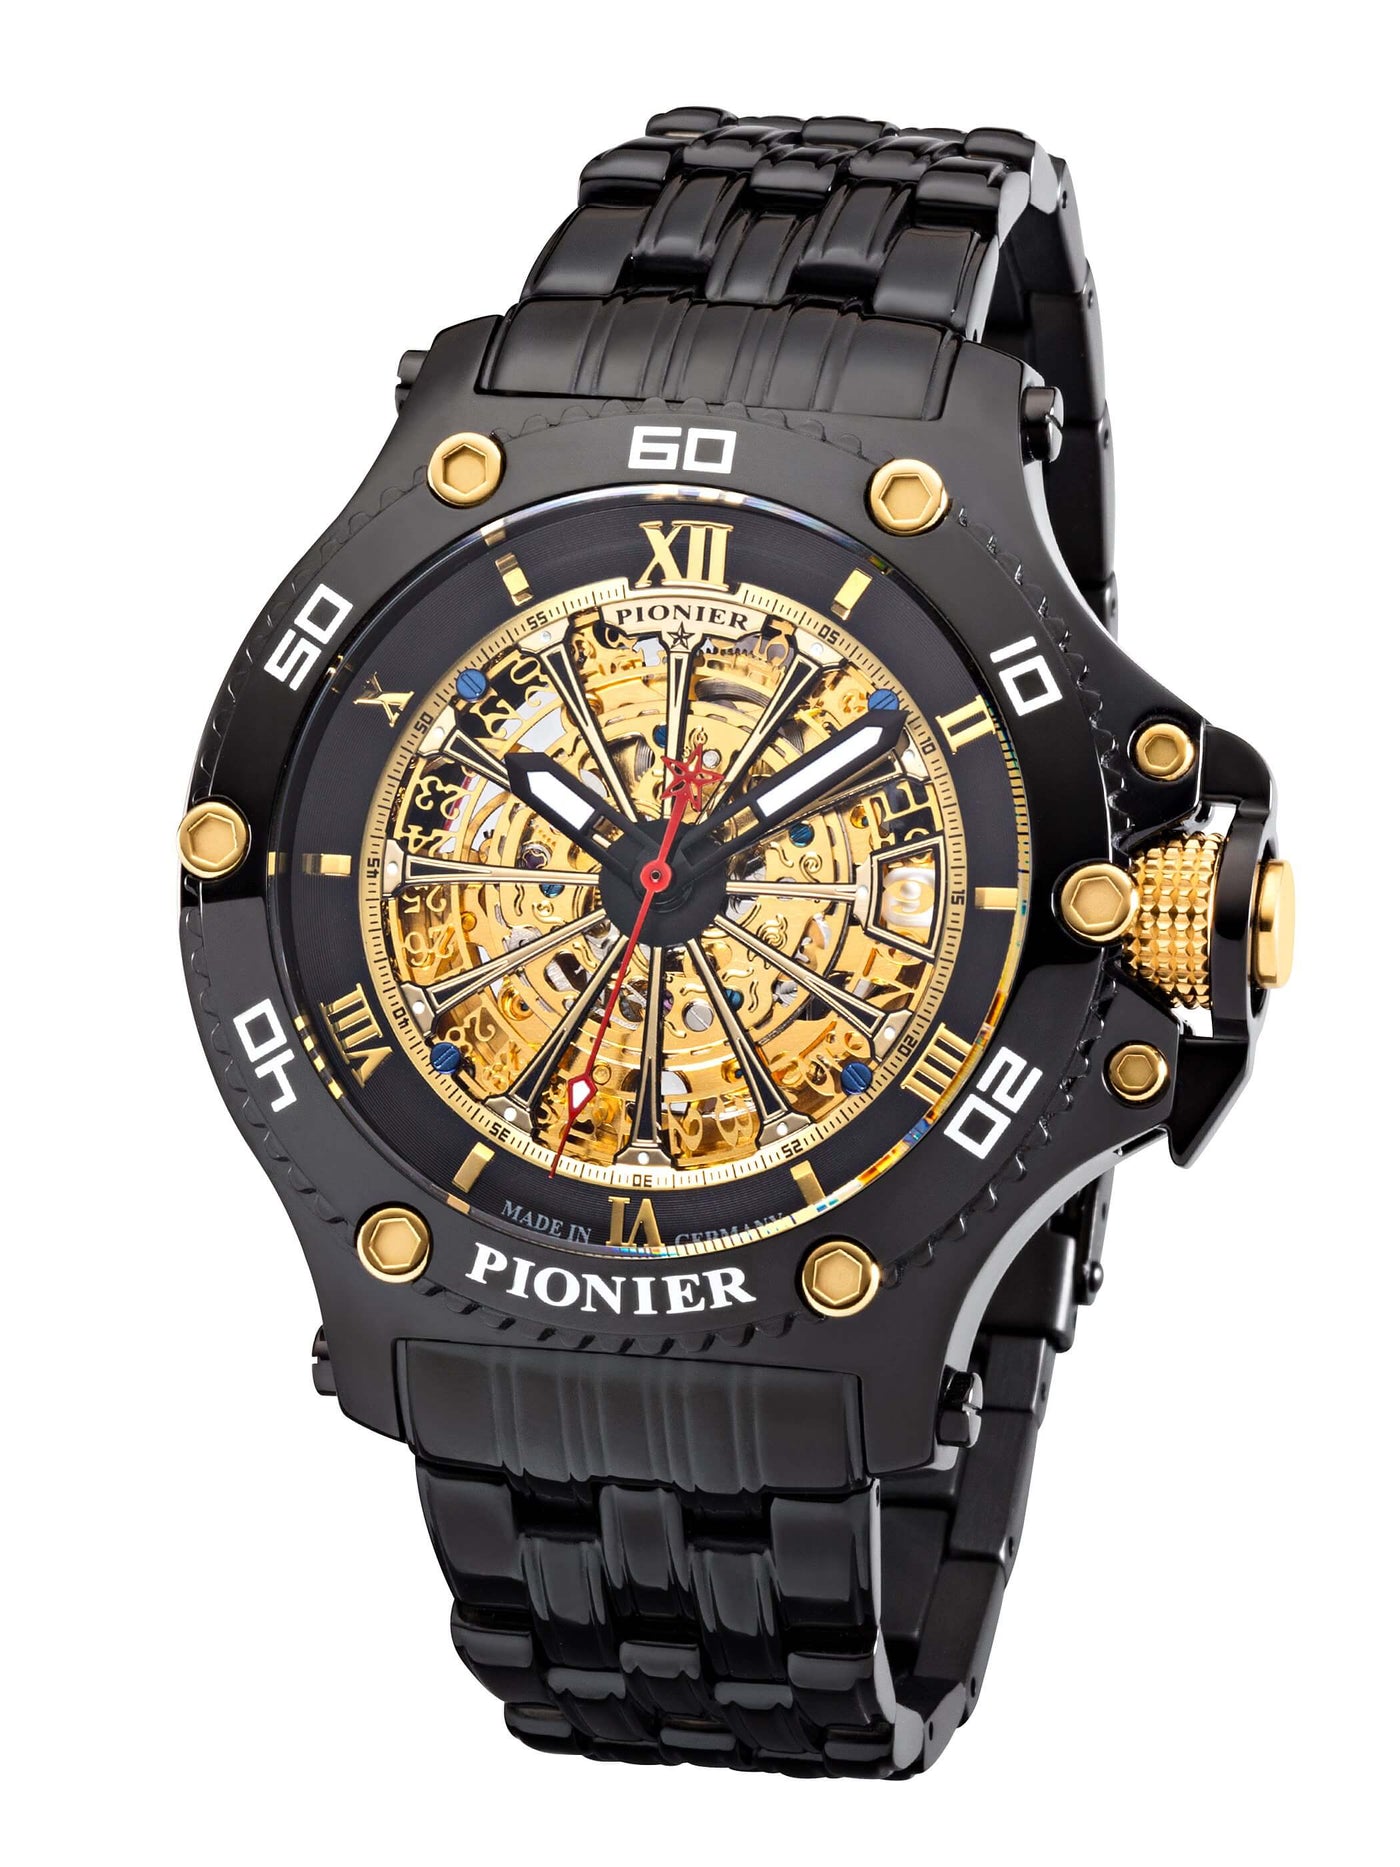 Barcelona Pionier GM-516-11 gold skeleton dial with black case and black stainless steel band.